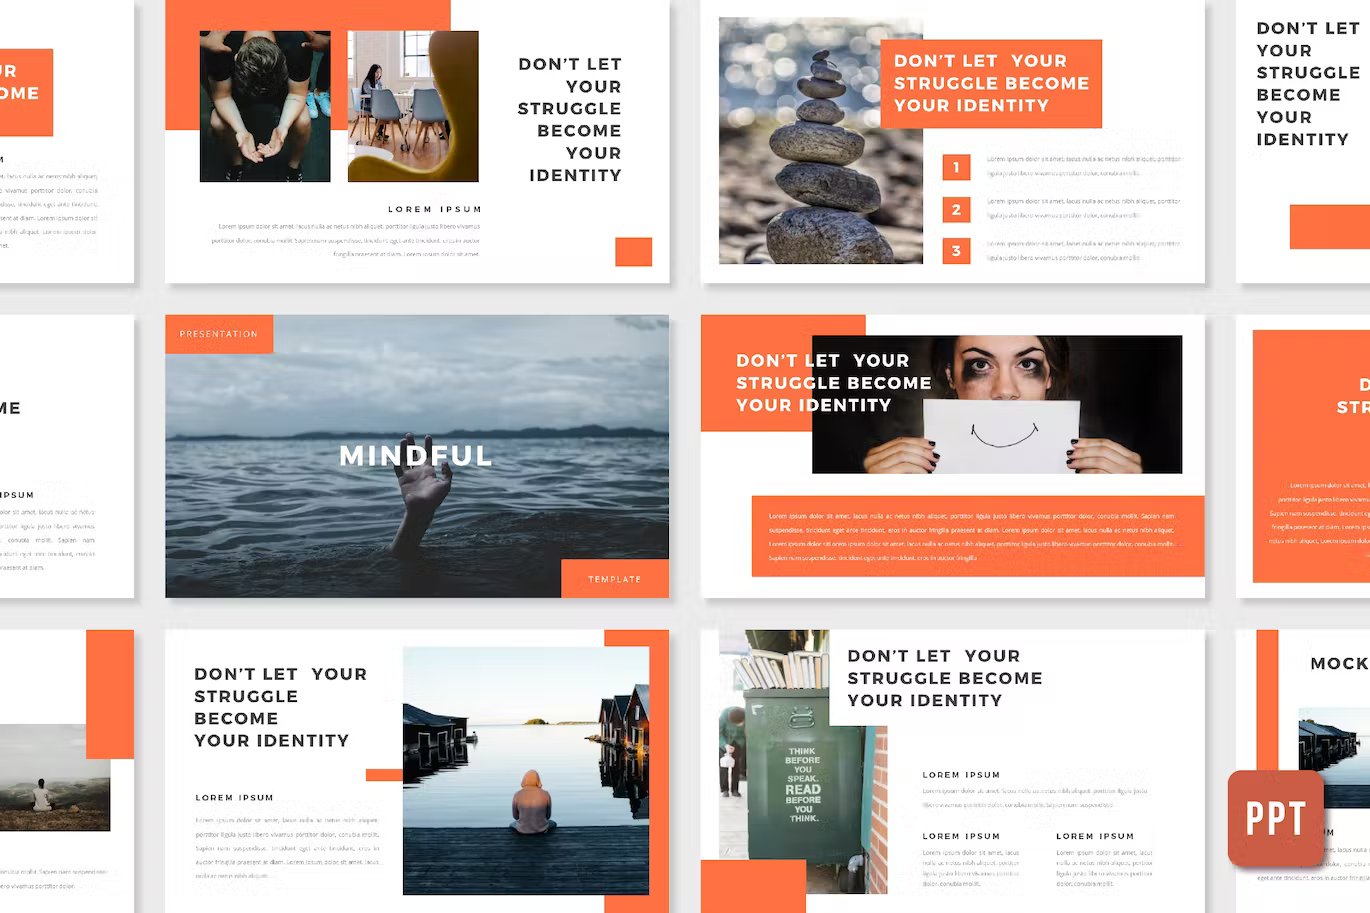 A set of different mindful - mental health templates in orange, white and black on a gray background.